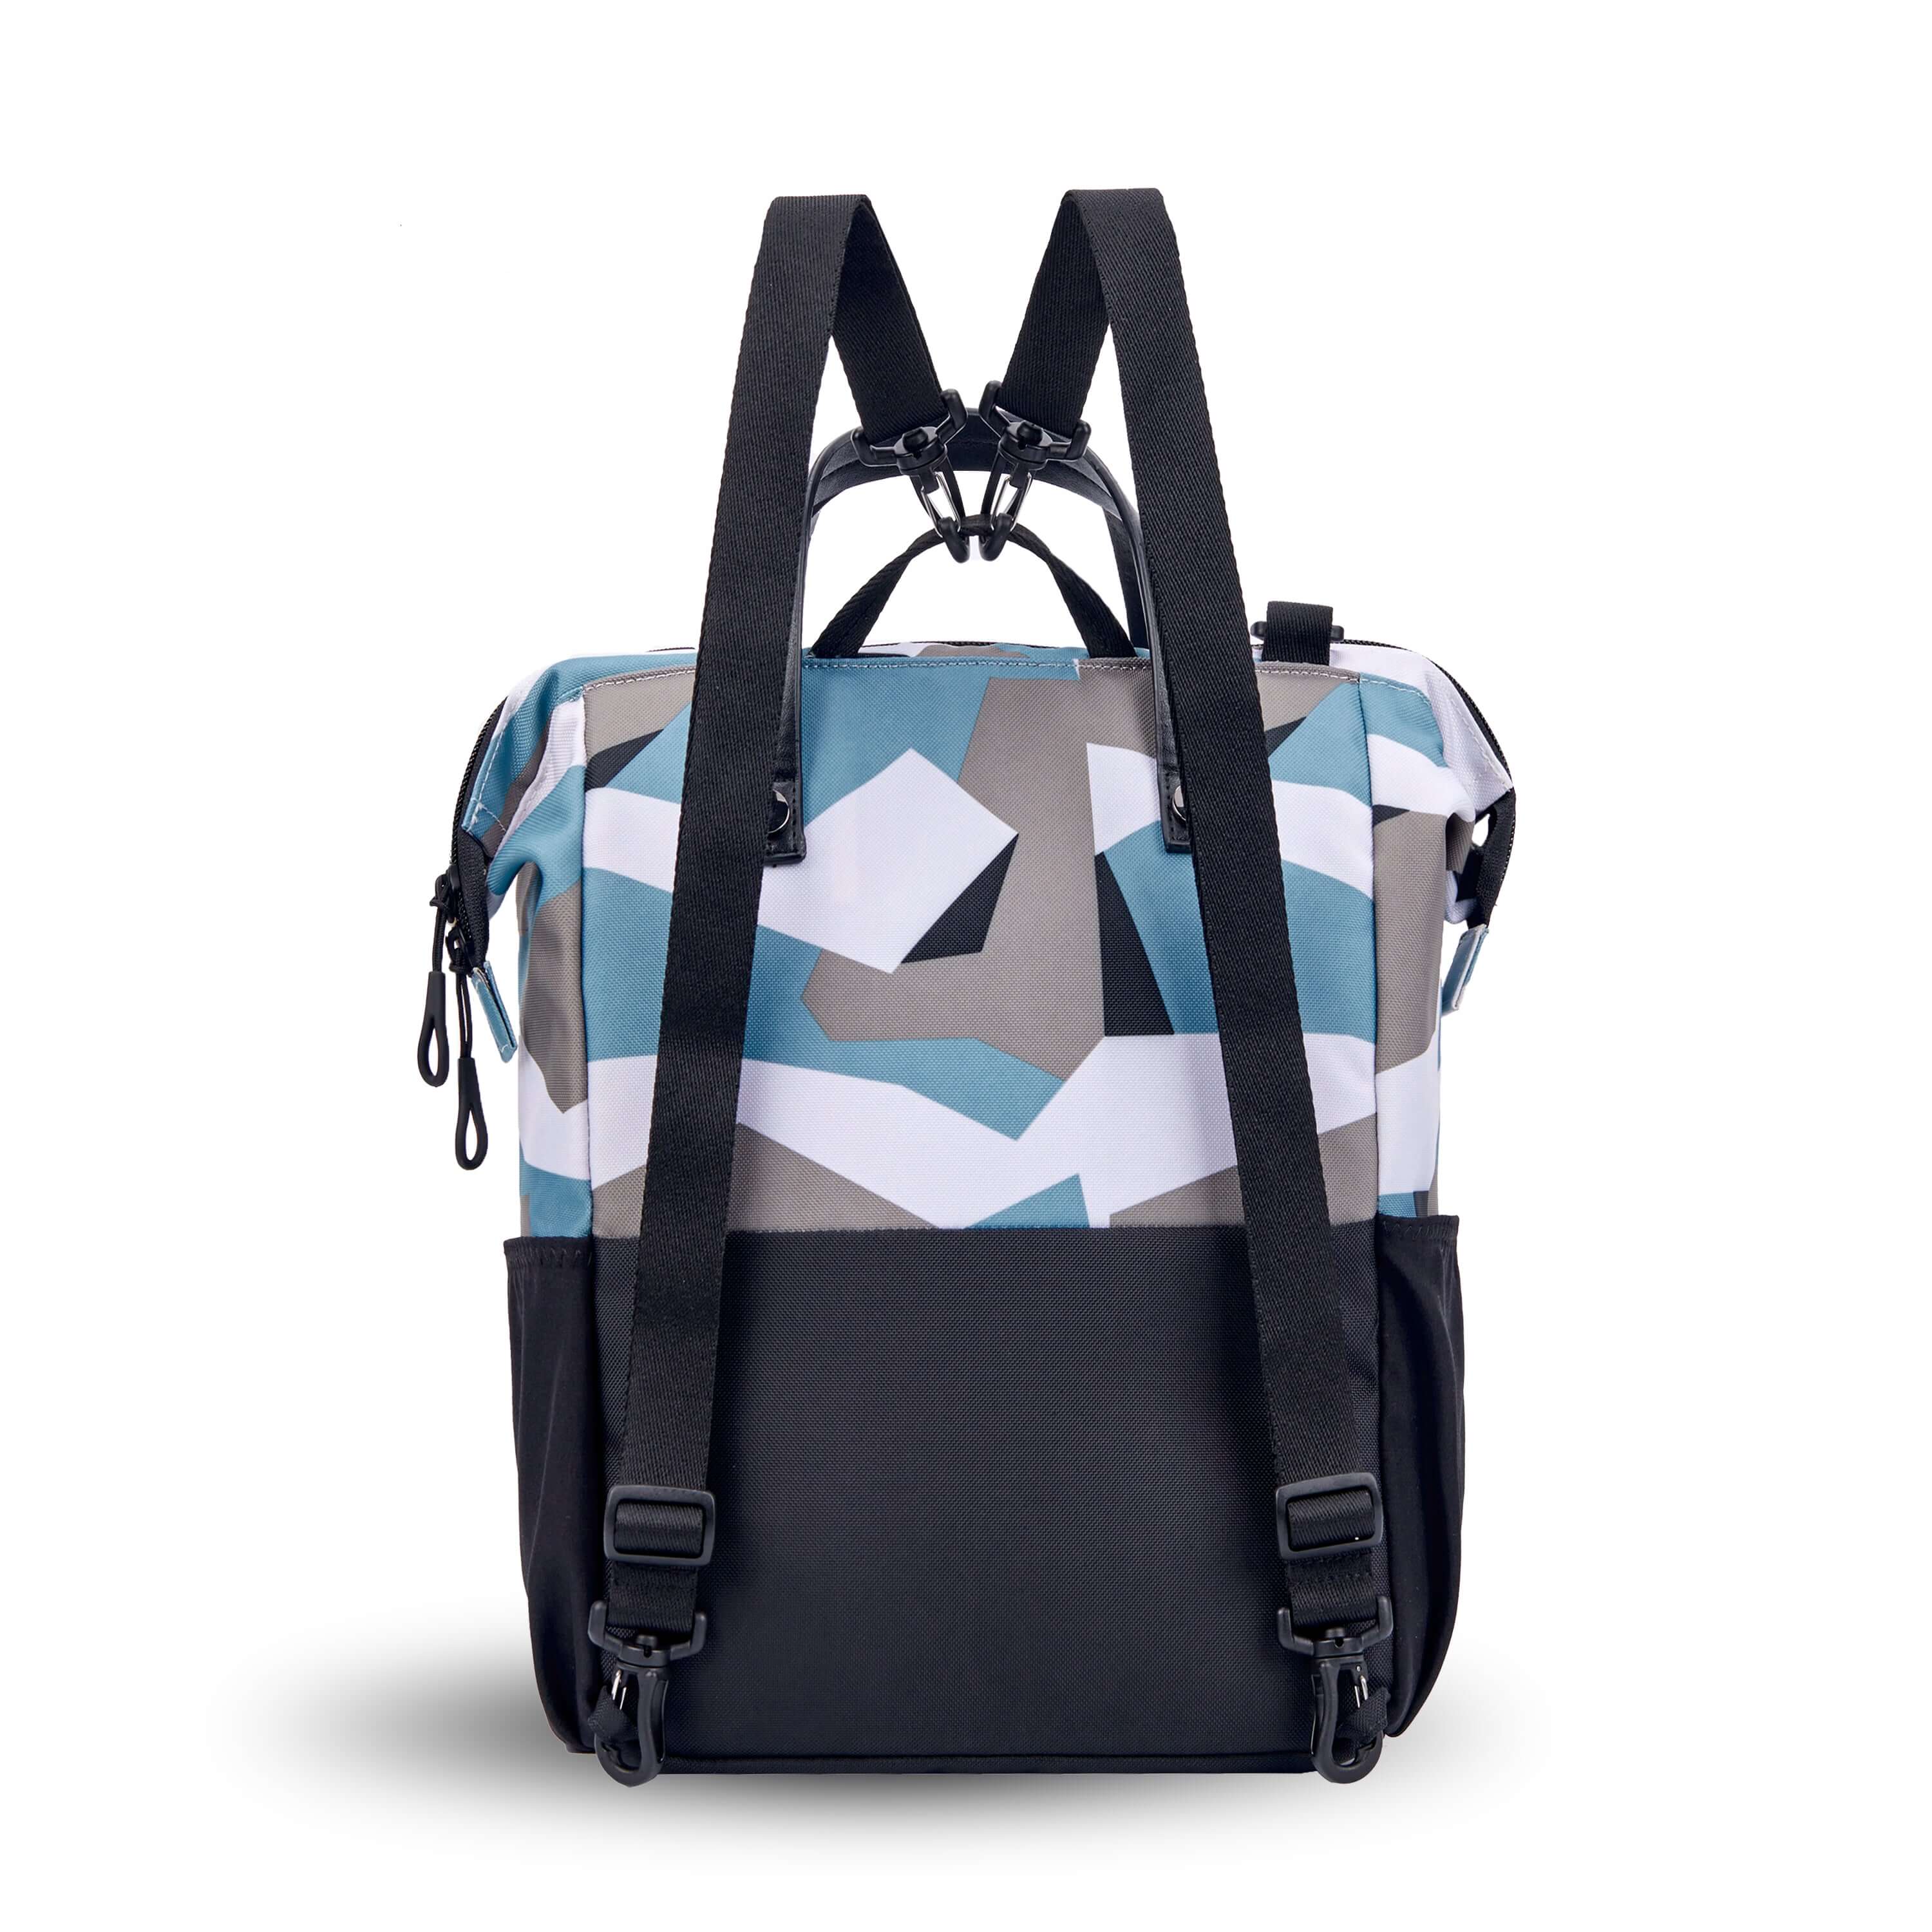 Back view of Sherpani three-in-one bag, the Dispatch in Summer Camo. The detachable straps are shown in the backpack style.